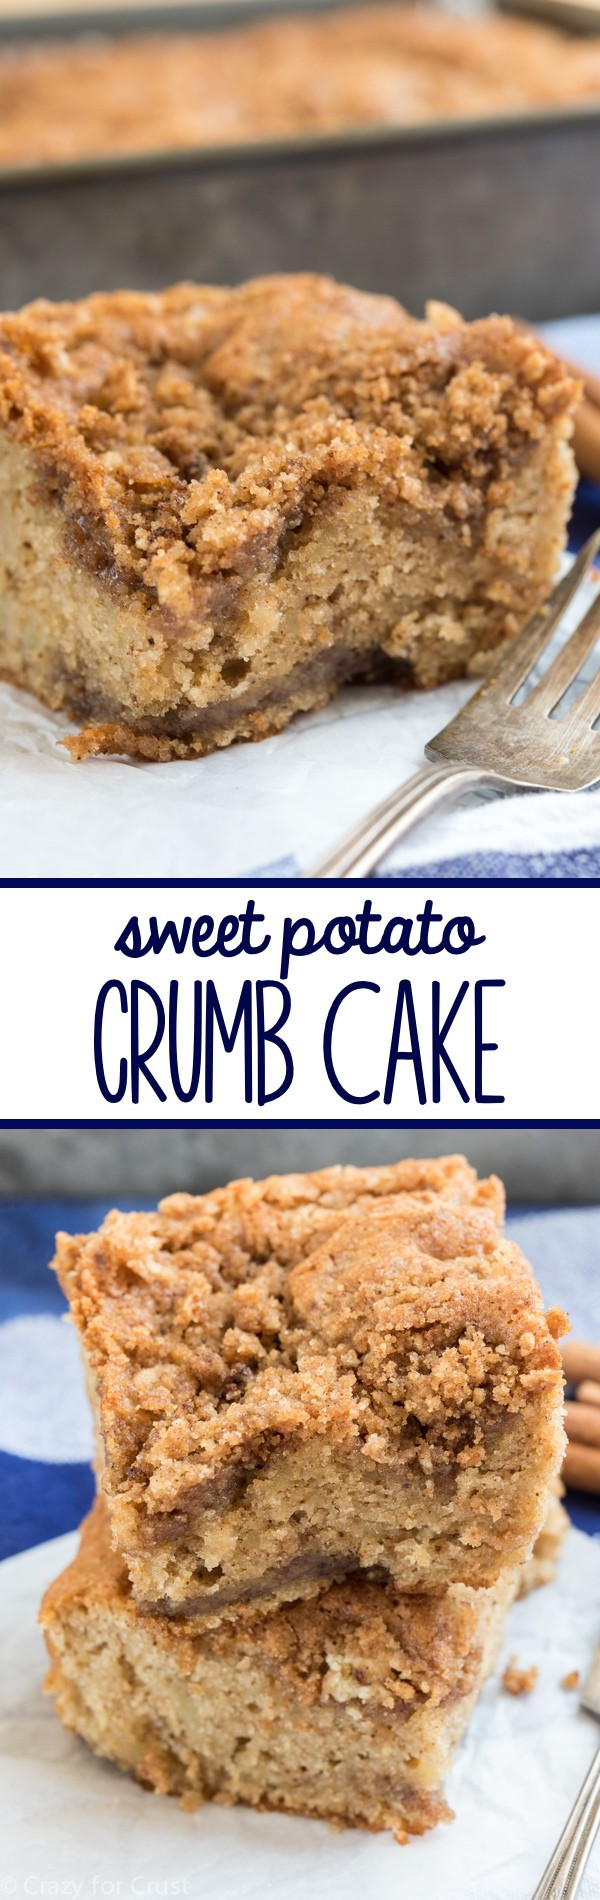 Sweet Potato Crumb Cake - This is the BEST Crumb Cake recipe I've ever had! An easy recipe for dessert or breakfast!